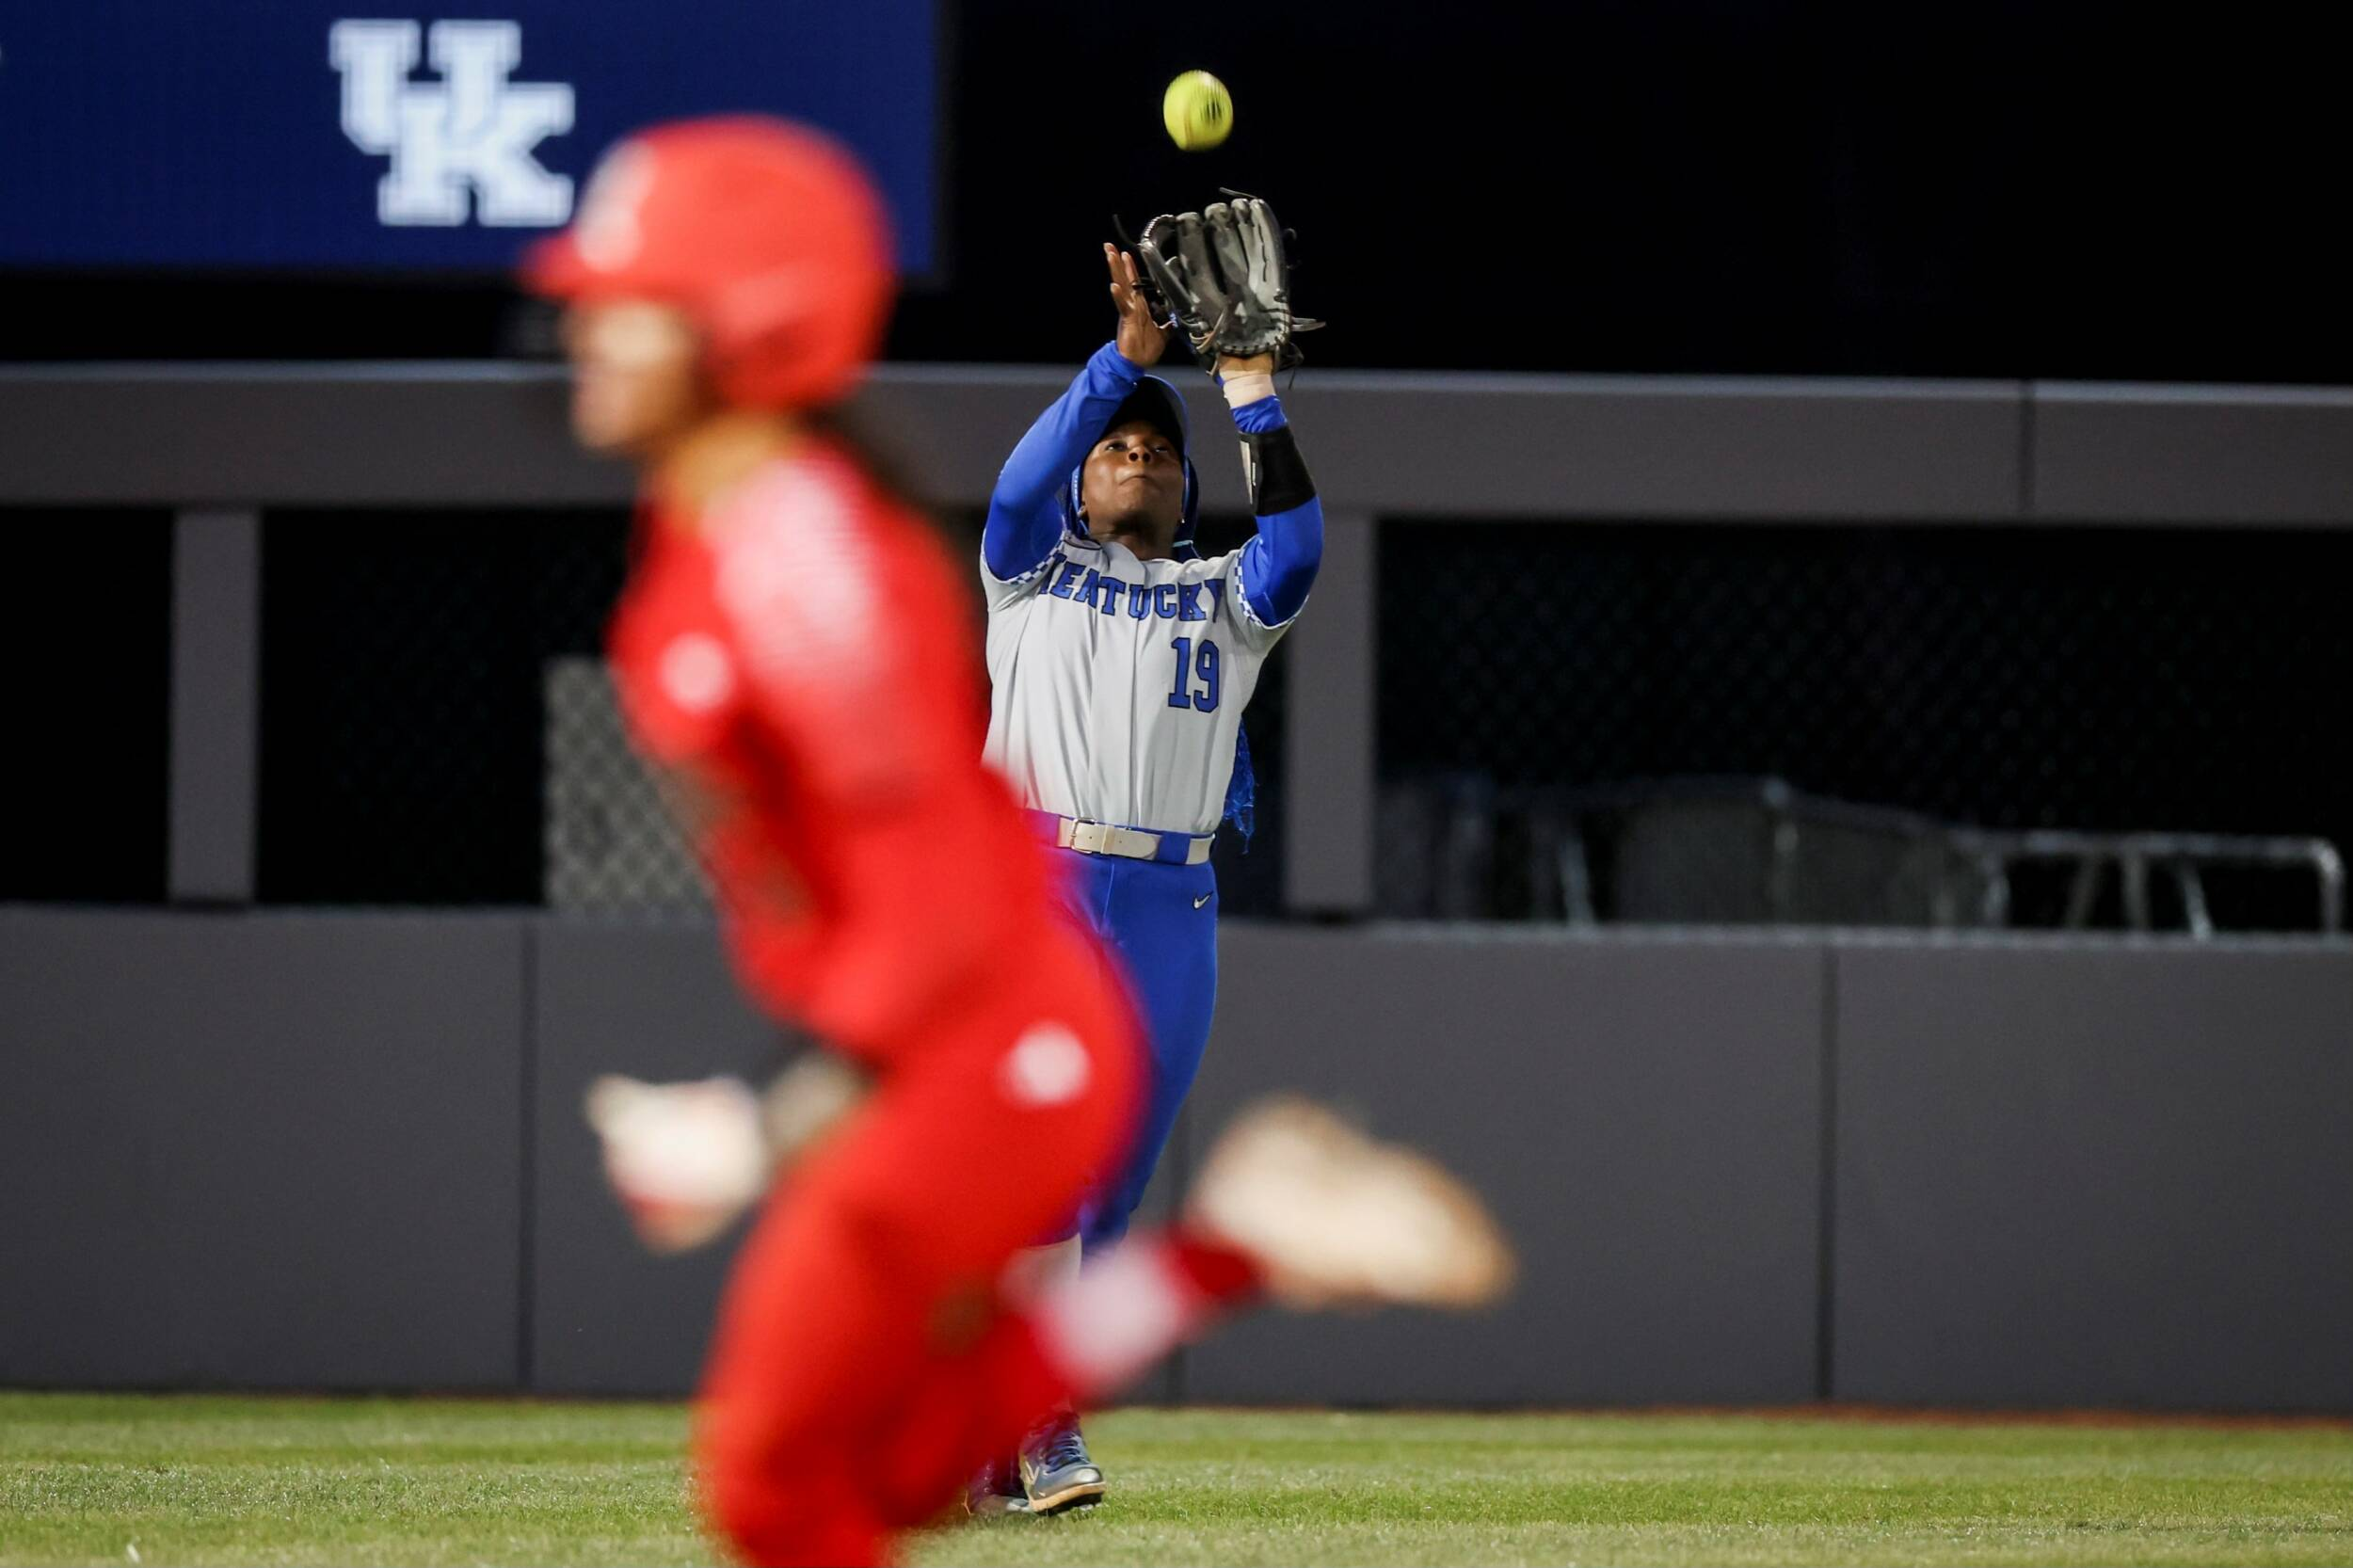 Smith and Harrison’s Clutch Hits Give No. 16 Kentucky Midweek Win